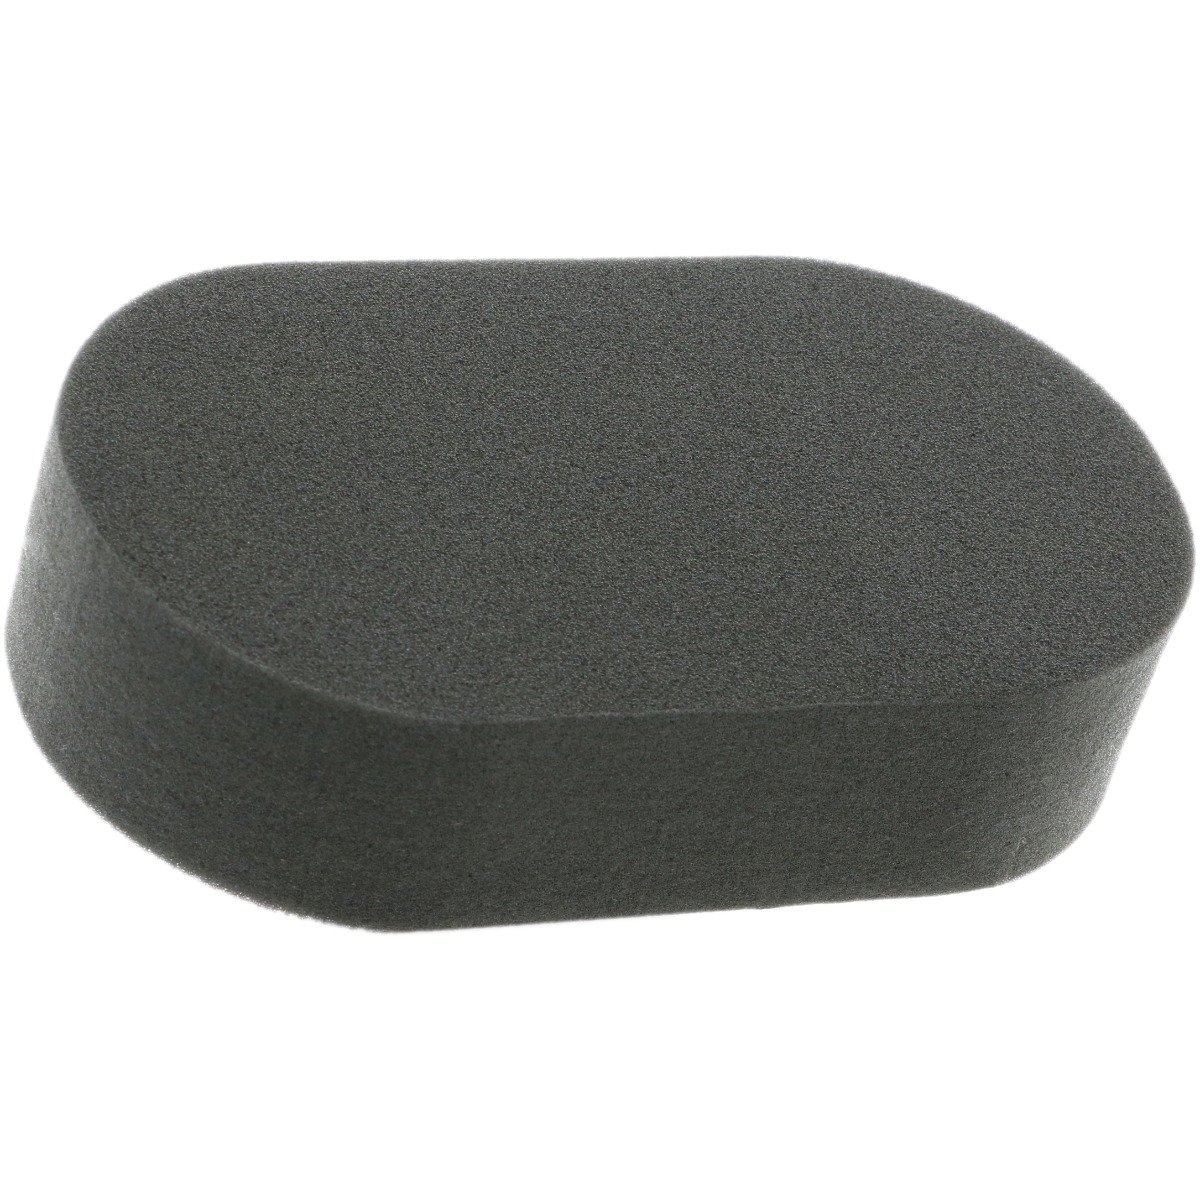 Easy Detailing Finessing Hand Pad - Black